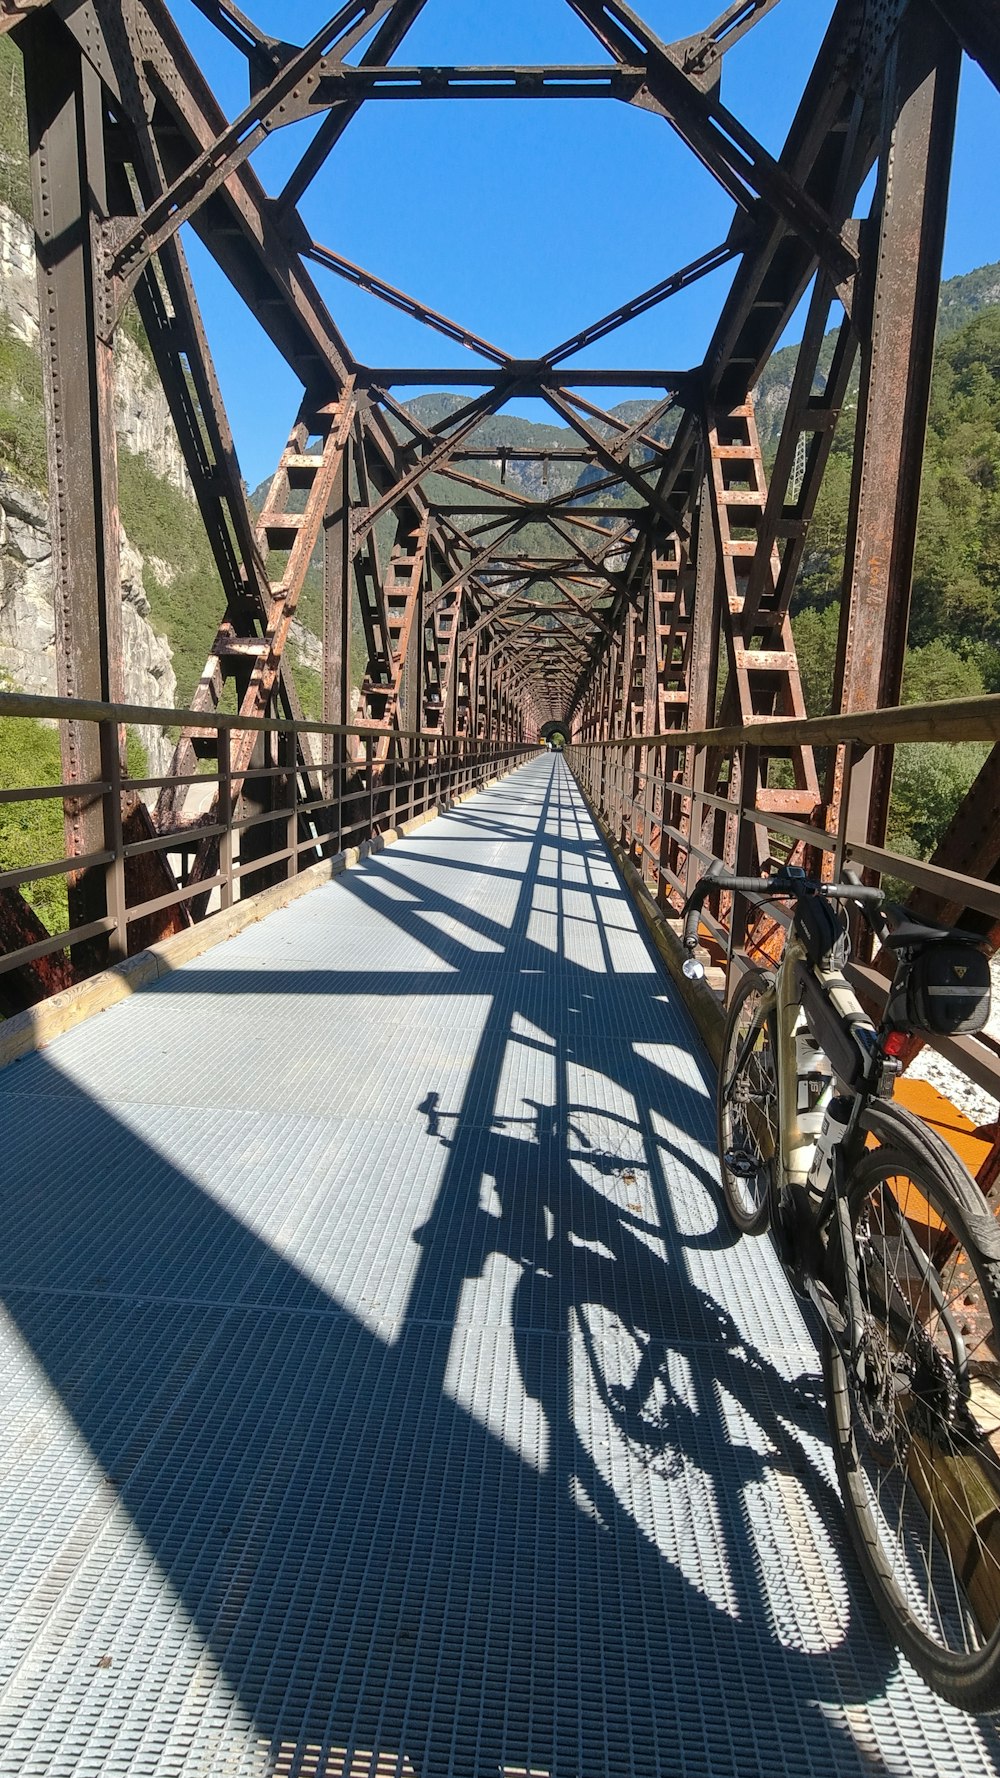 a bicycle is parked on a metal bridge